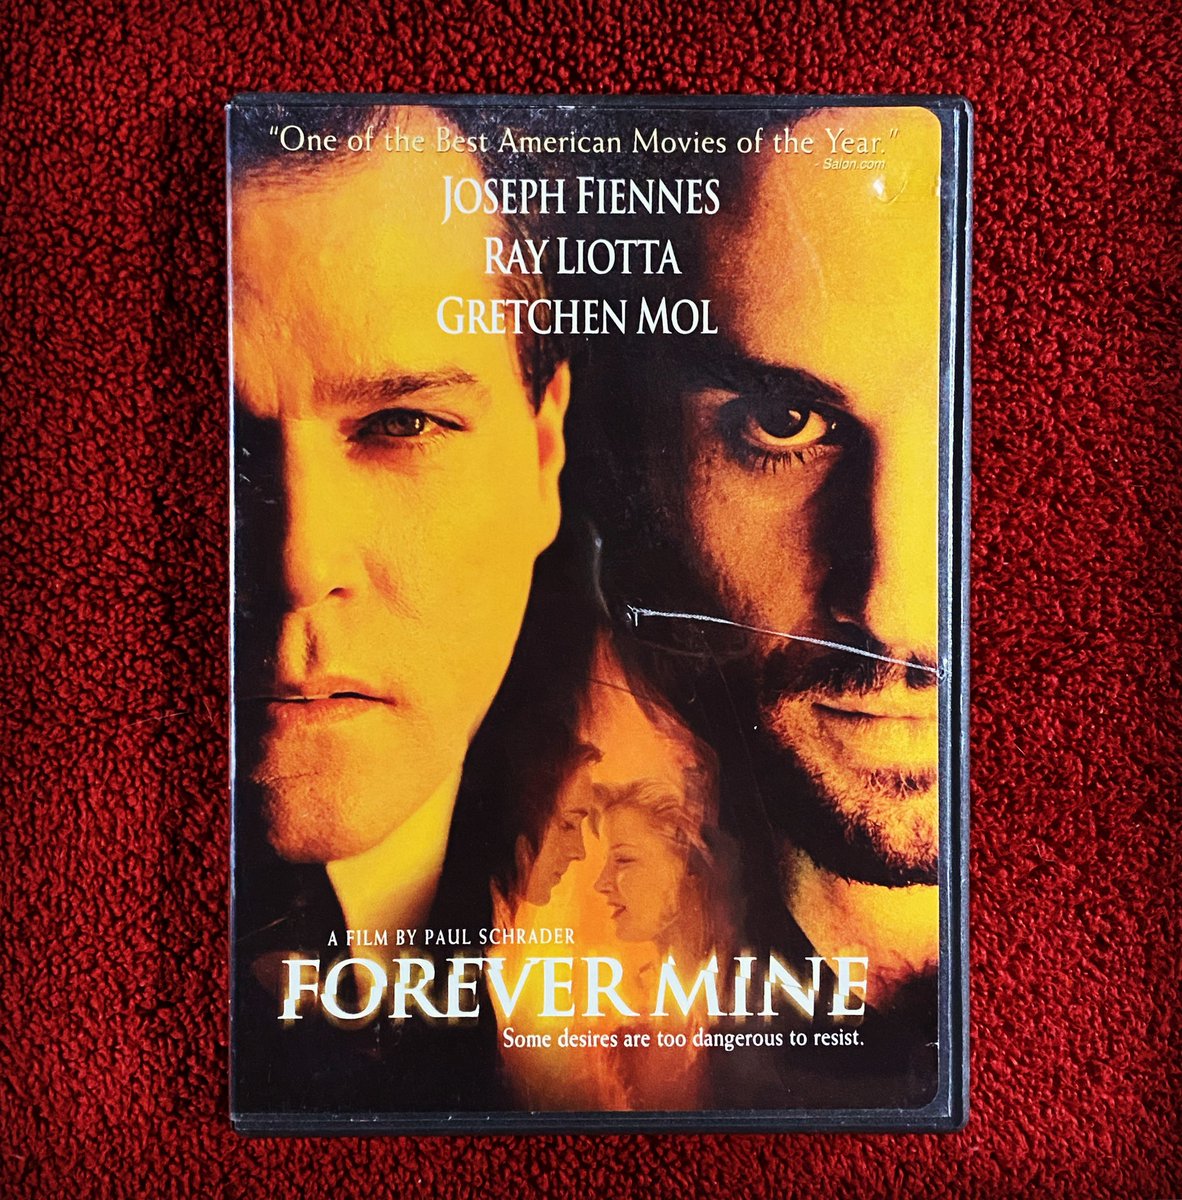 More St. Paul of Schrader on this cold and wet Tuesday…

Now watching - FOREVER MINE (1999) D. Paul Schrader

#forevermine #paulschrader #josephfiennes #rayliotta #gretchenmol